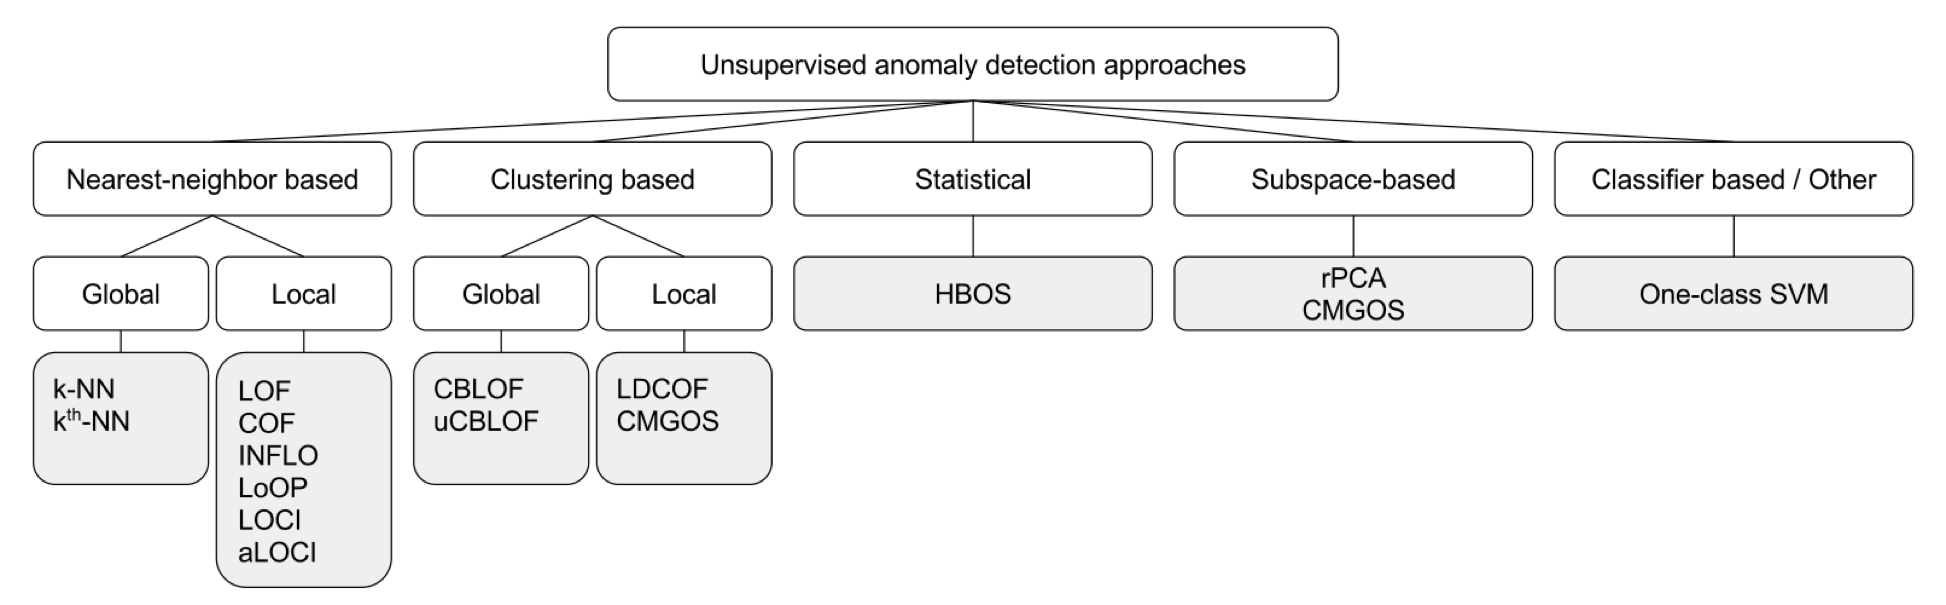 Figure 7. Unsupervised anomaly detection approaches classification diagram